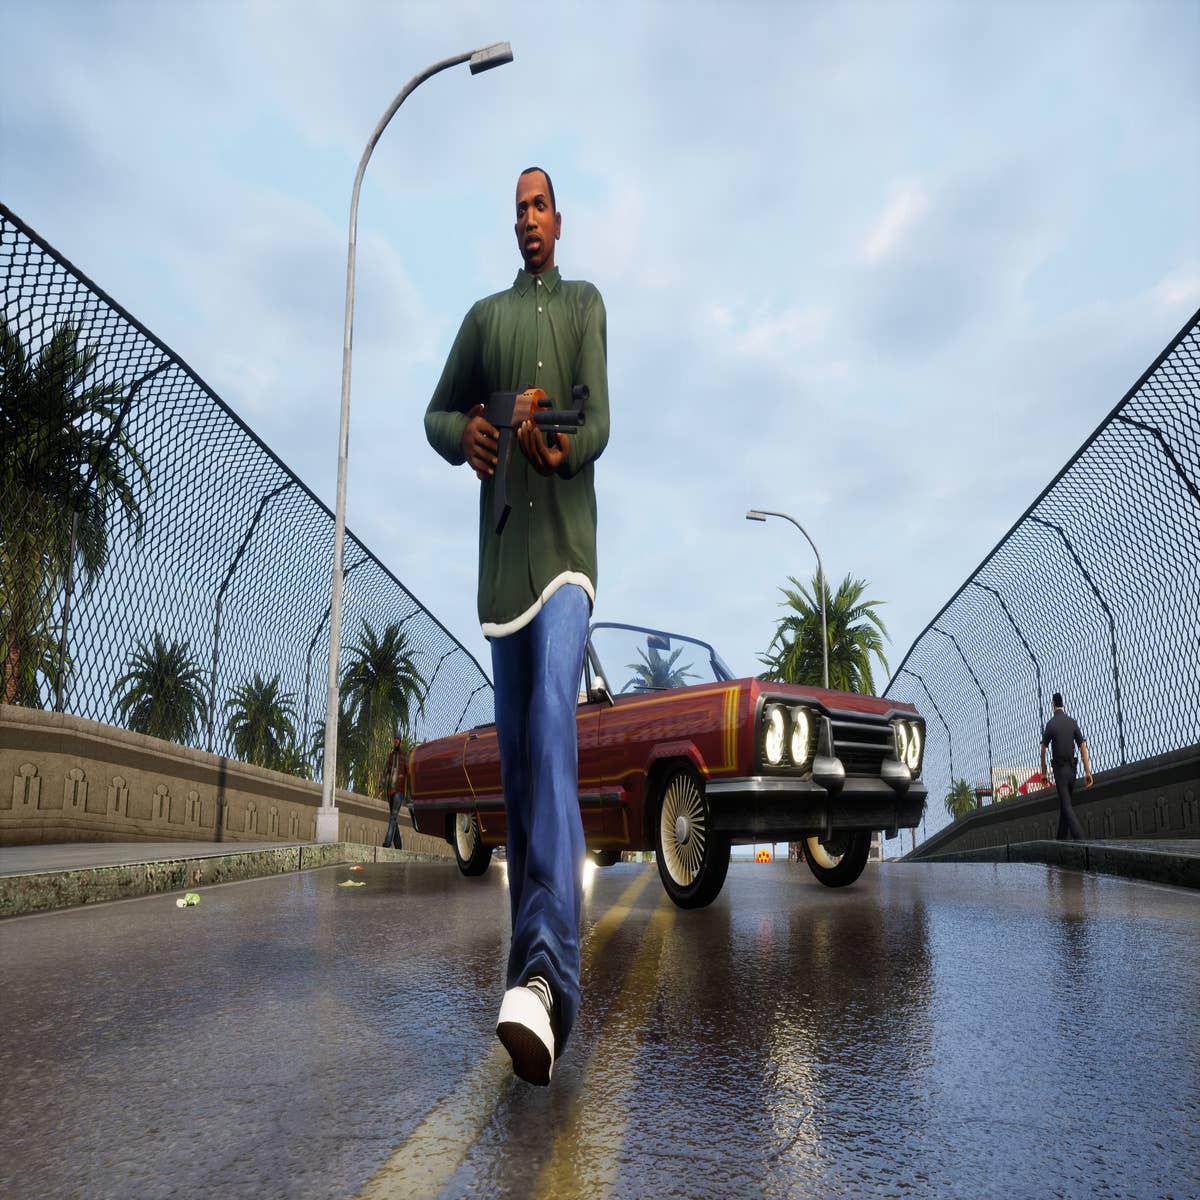 GTA San Andreas Cheats for All Xbox Consoles (including Xbox